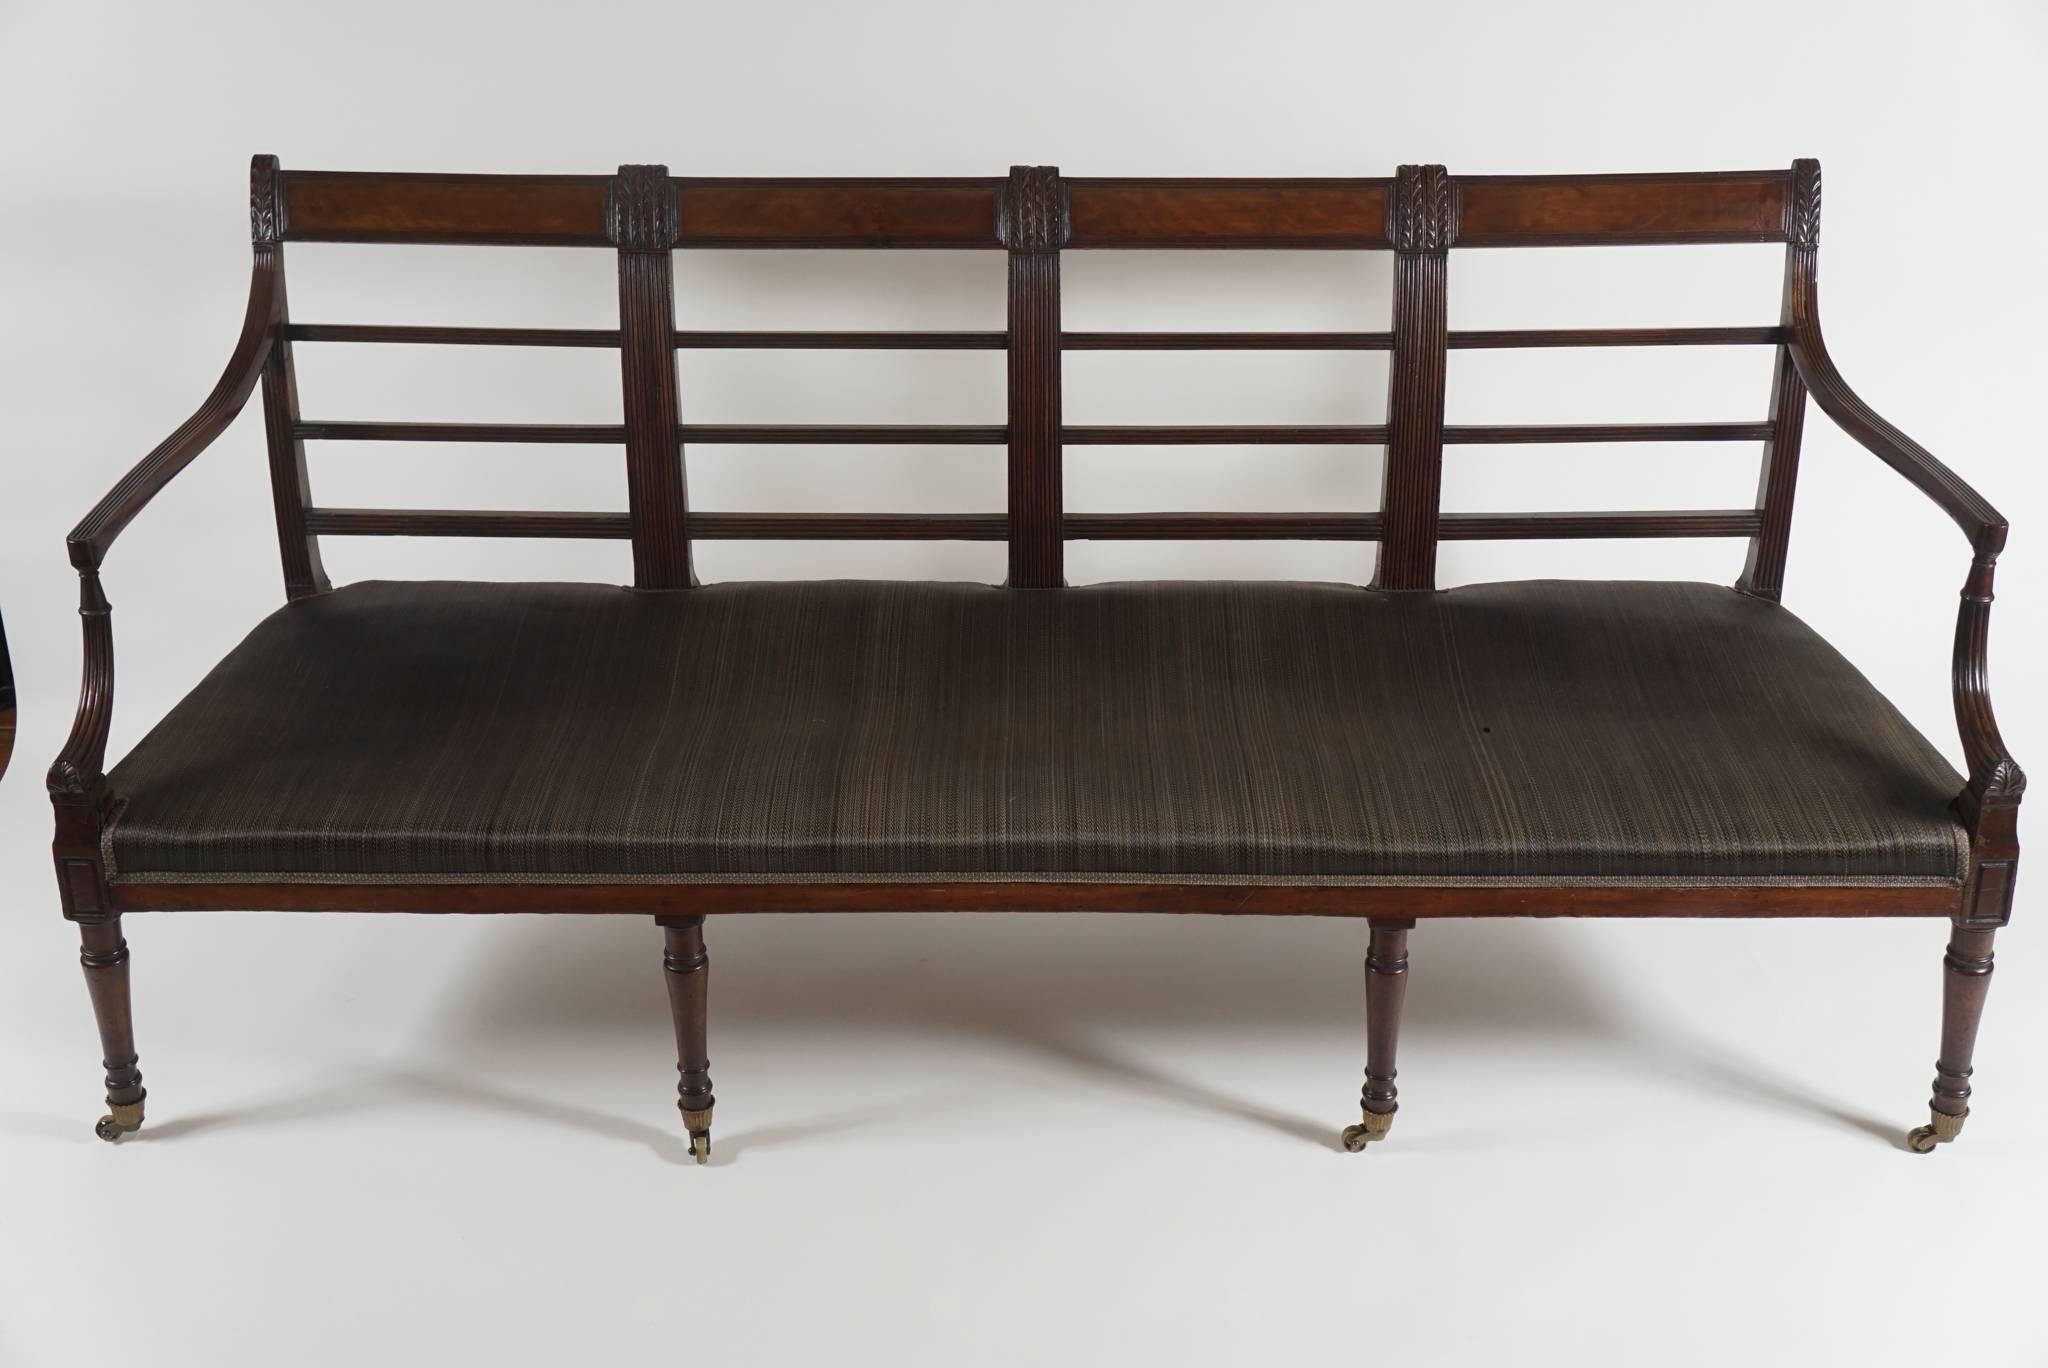 An unusual circa 1795, English George III period settee in Sheraton style of solid mahogany construction and rectangular form having four section 'ladder' back with inlaid tablet form crest-rail sections connecting reeded and acanthus carved